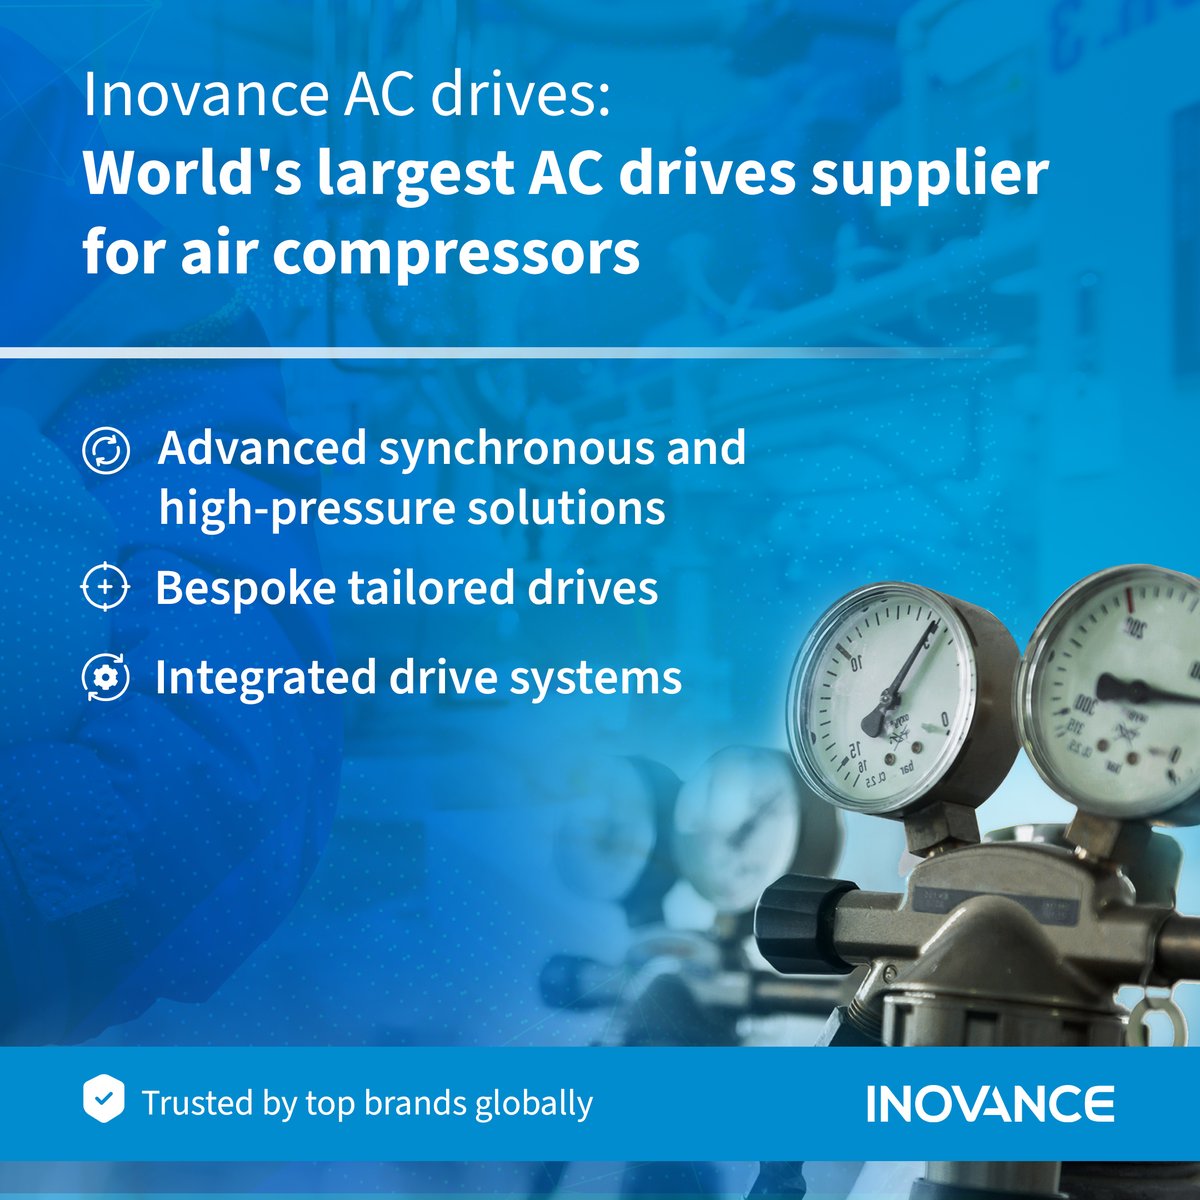 Powering Efficiency in Compressed Air: Inovance - Your Air Compressor Drive Partner🤝

Inovance Technology is a global leader in AC drives for air compressors, trusted by top brands worldwide! 🏆🛠️

#inovance #aircompressordrives #energyefficiency #compressedairsolutions